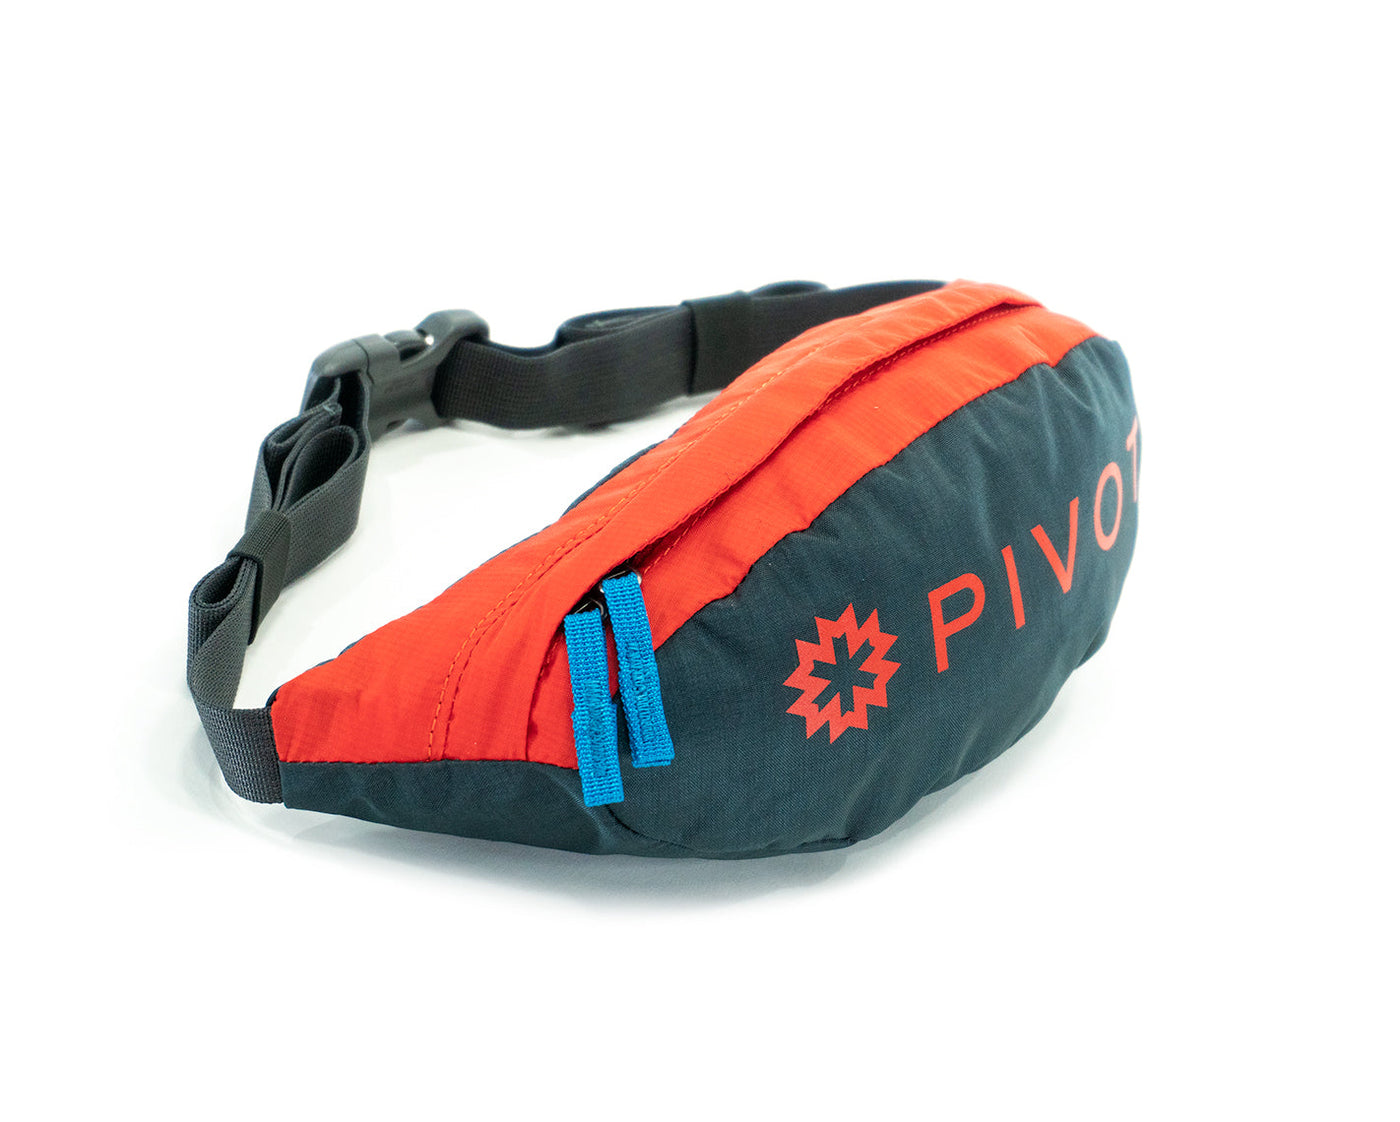 Oval waist pack with logo. Products for Businesses and events.